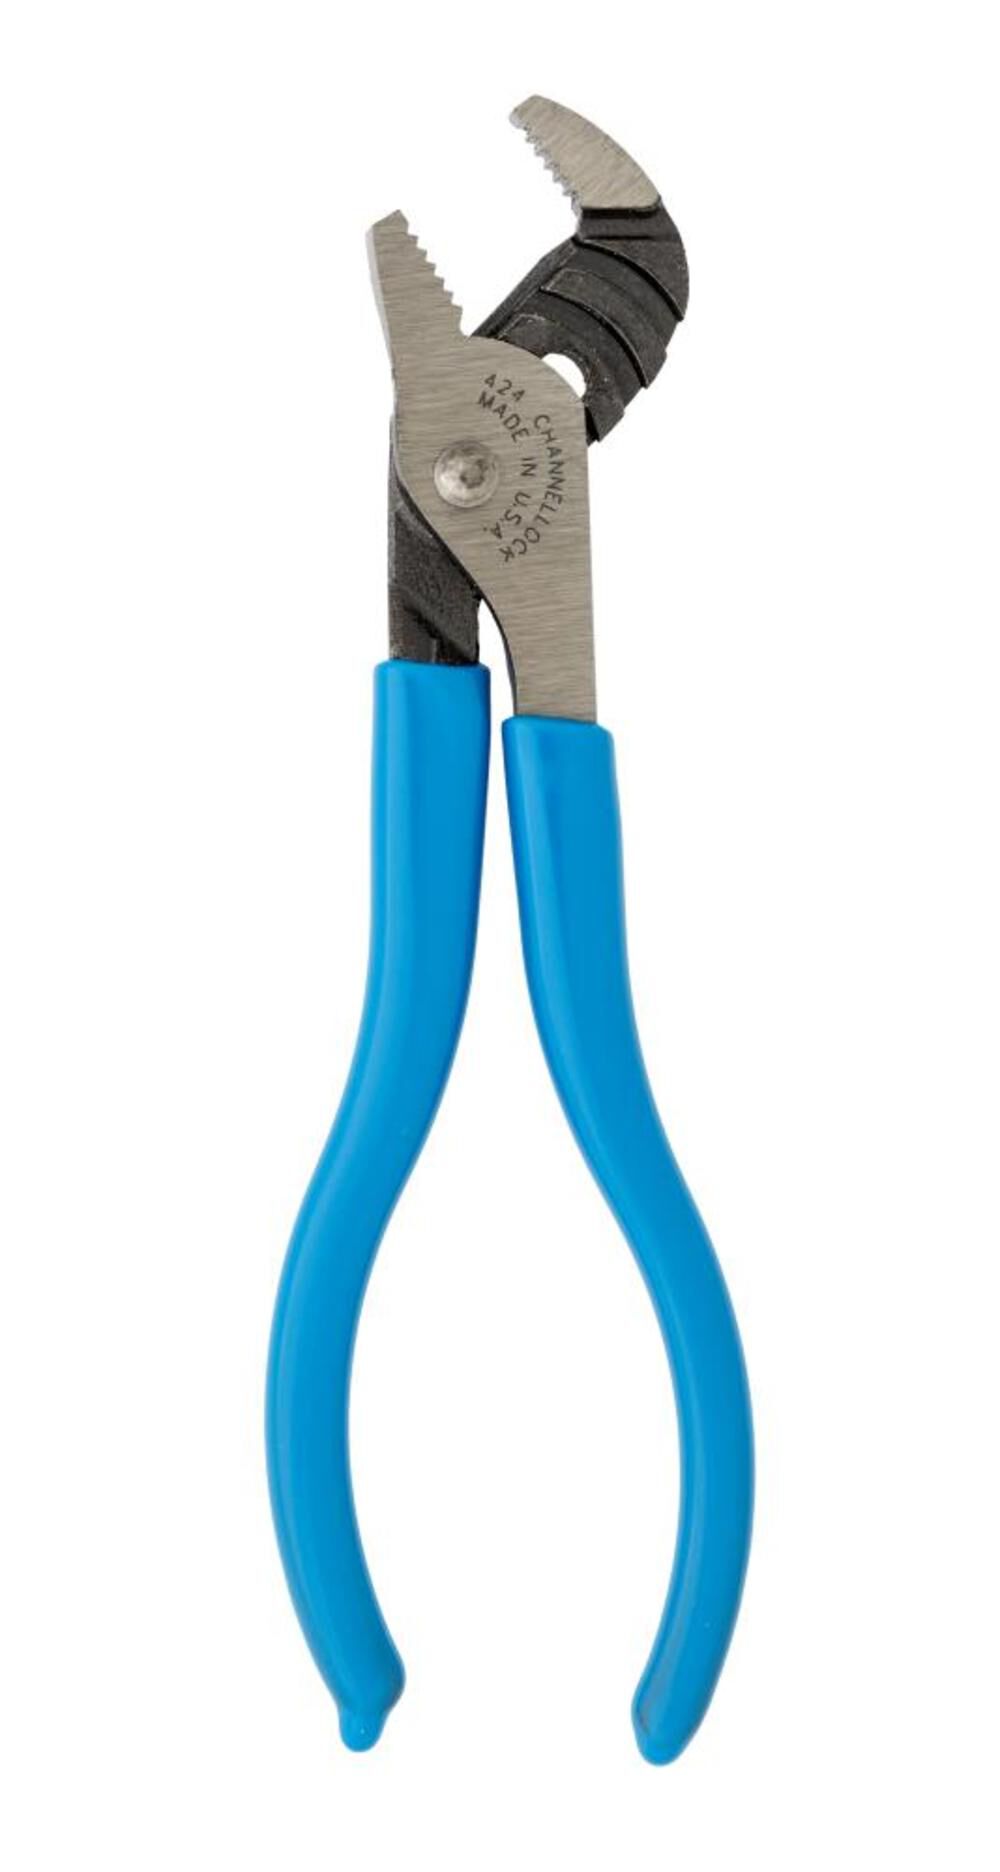 4.5 In. Straight Jaw Tongue & Groove Plier 424